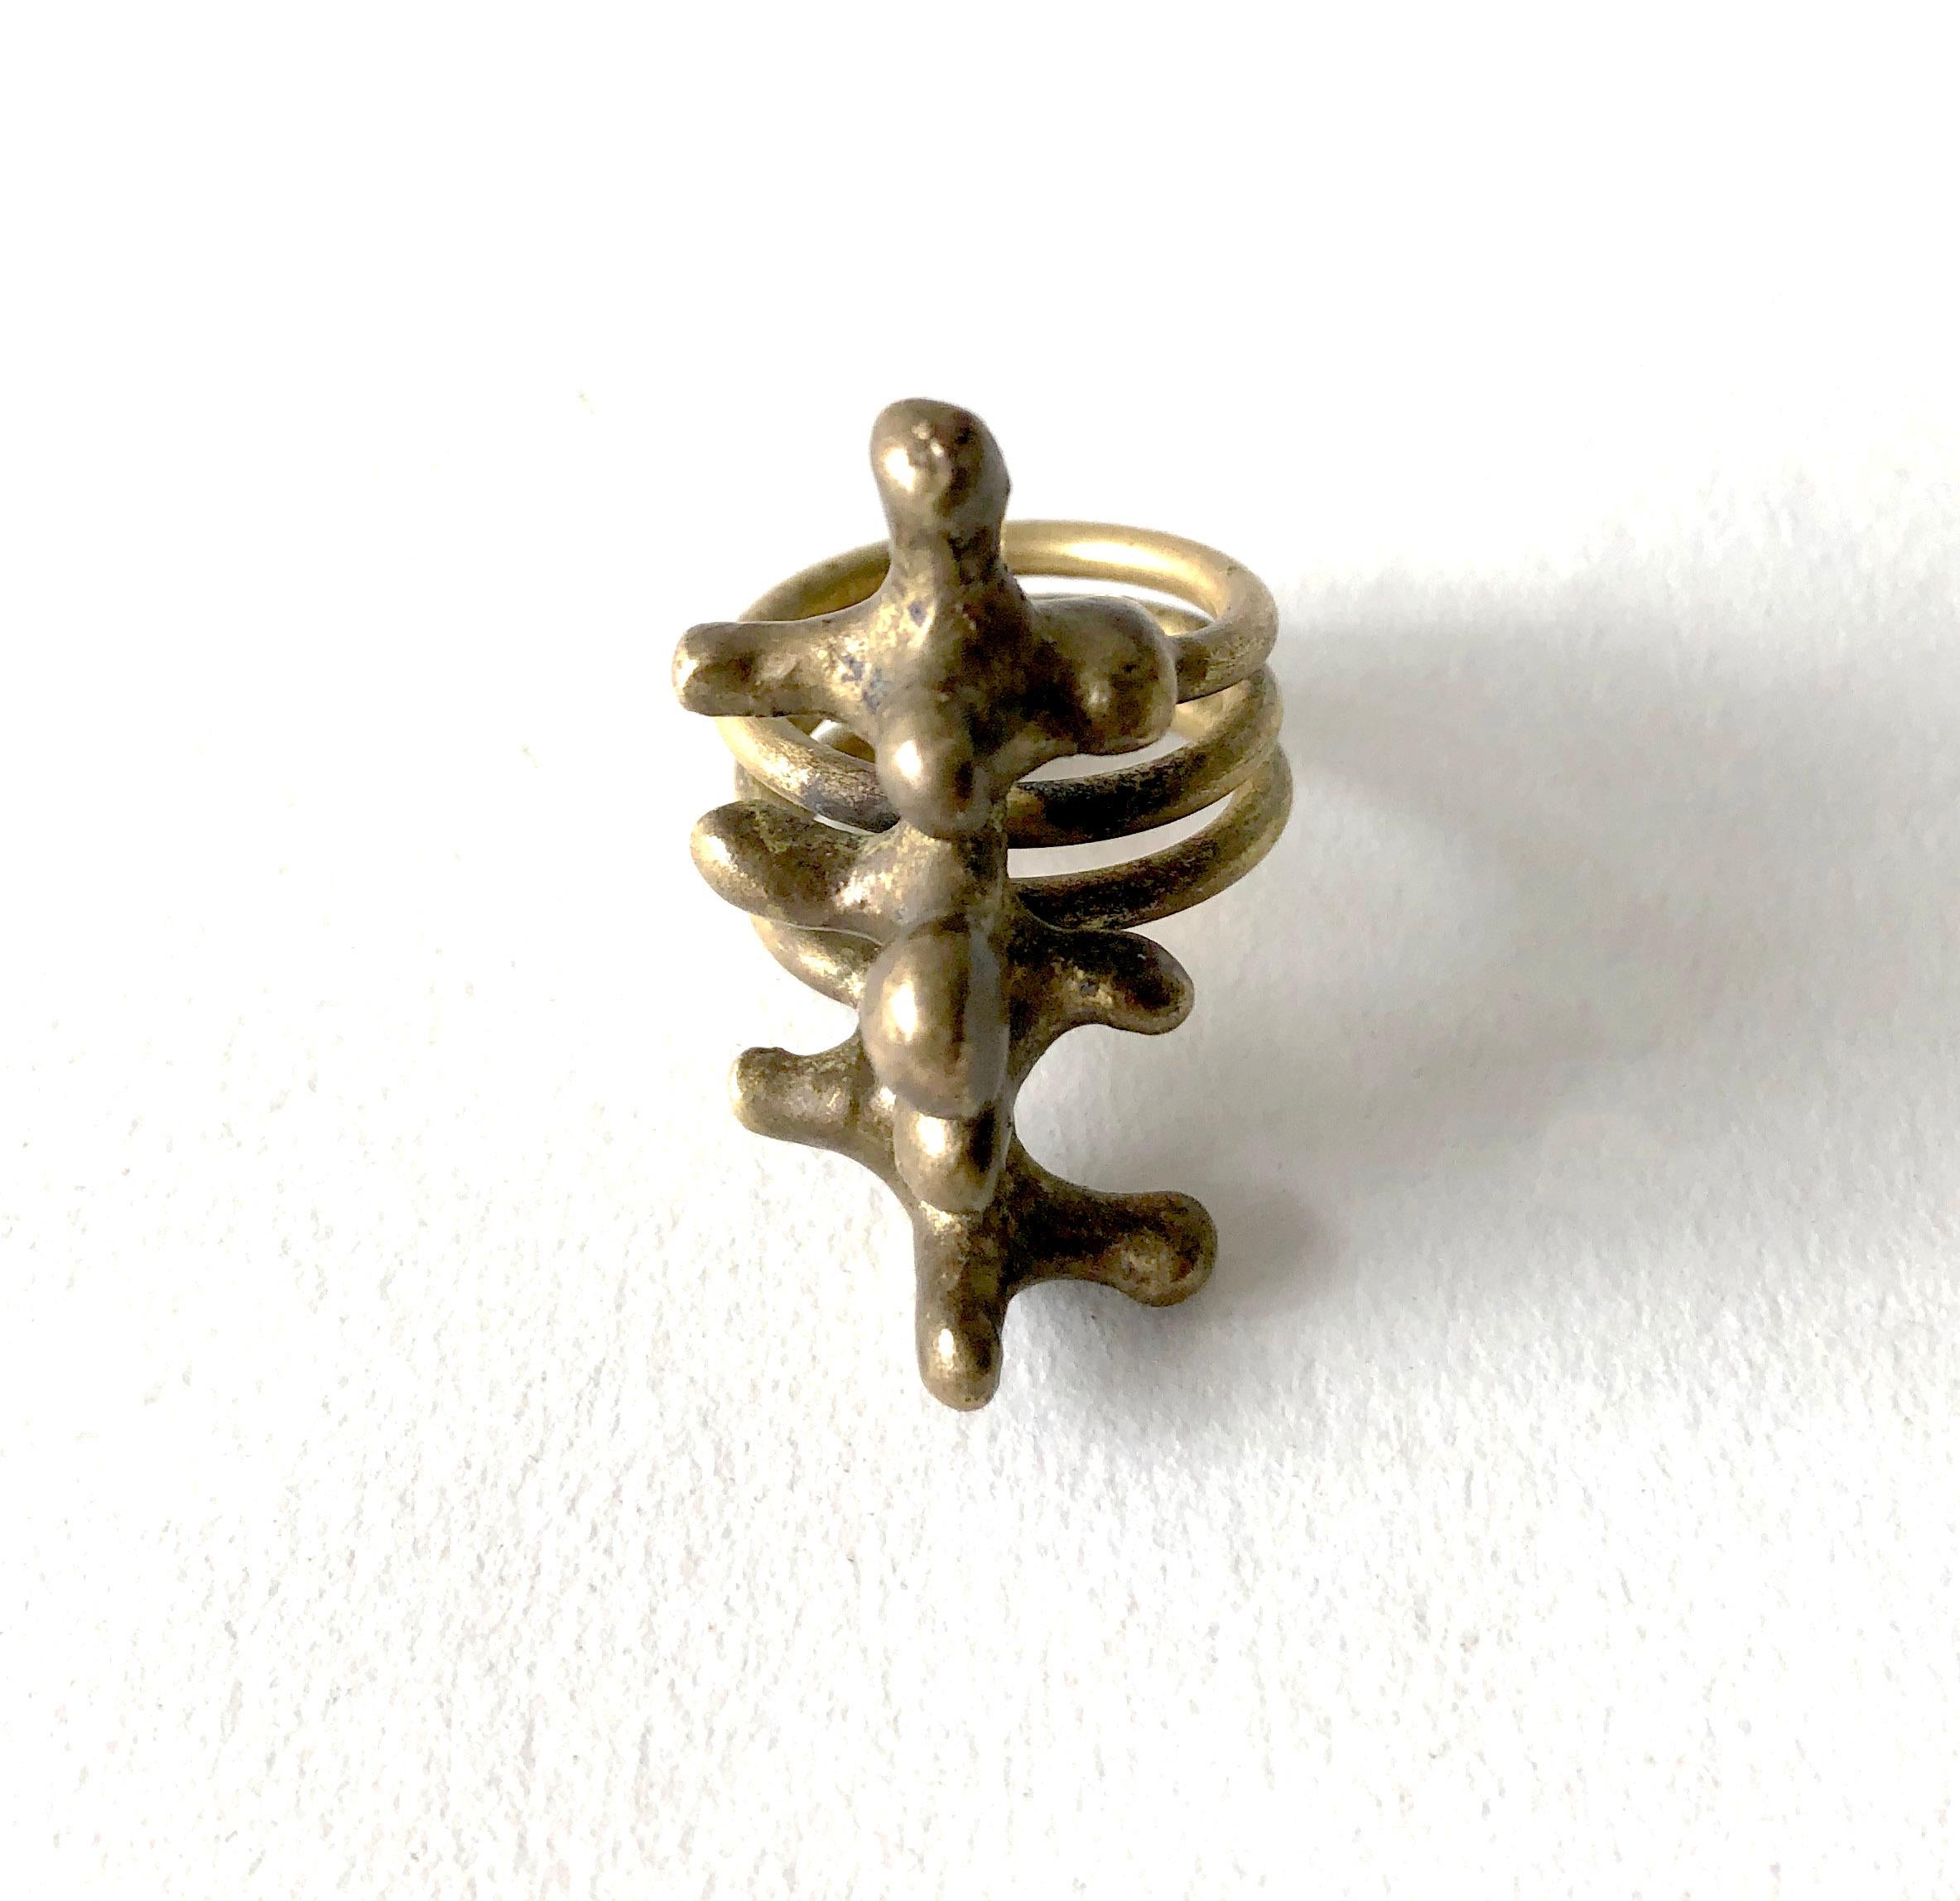 Bronze spore ring created by Jack Boyd of San Diego, California.  Ring is a finger size 6 and measures 1.5